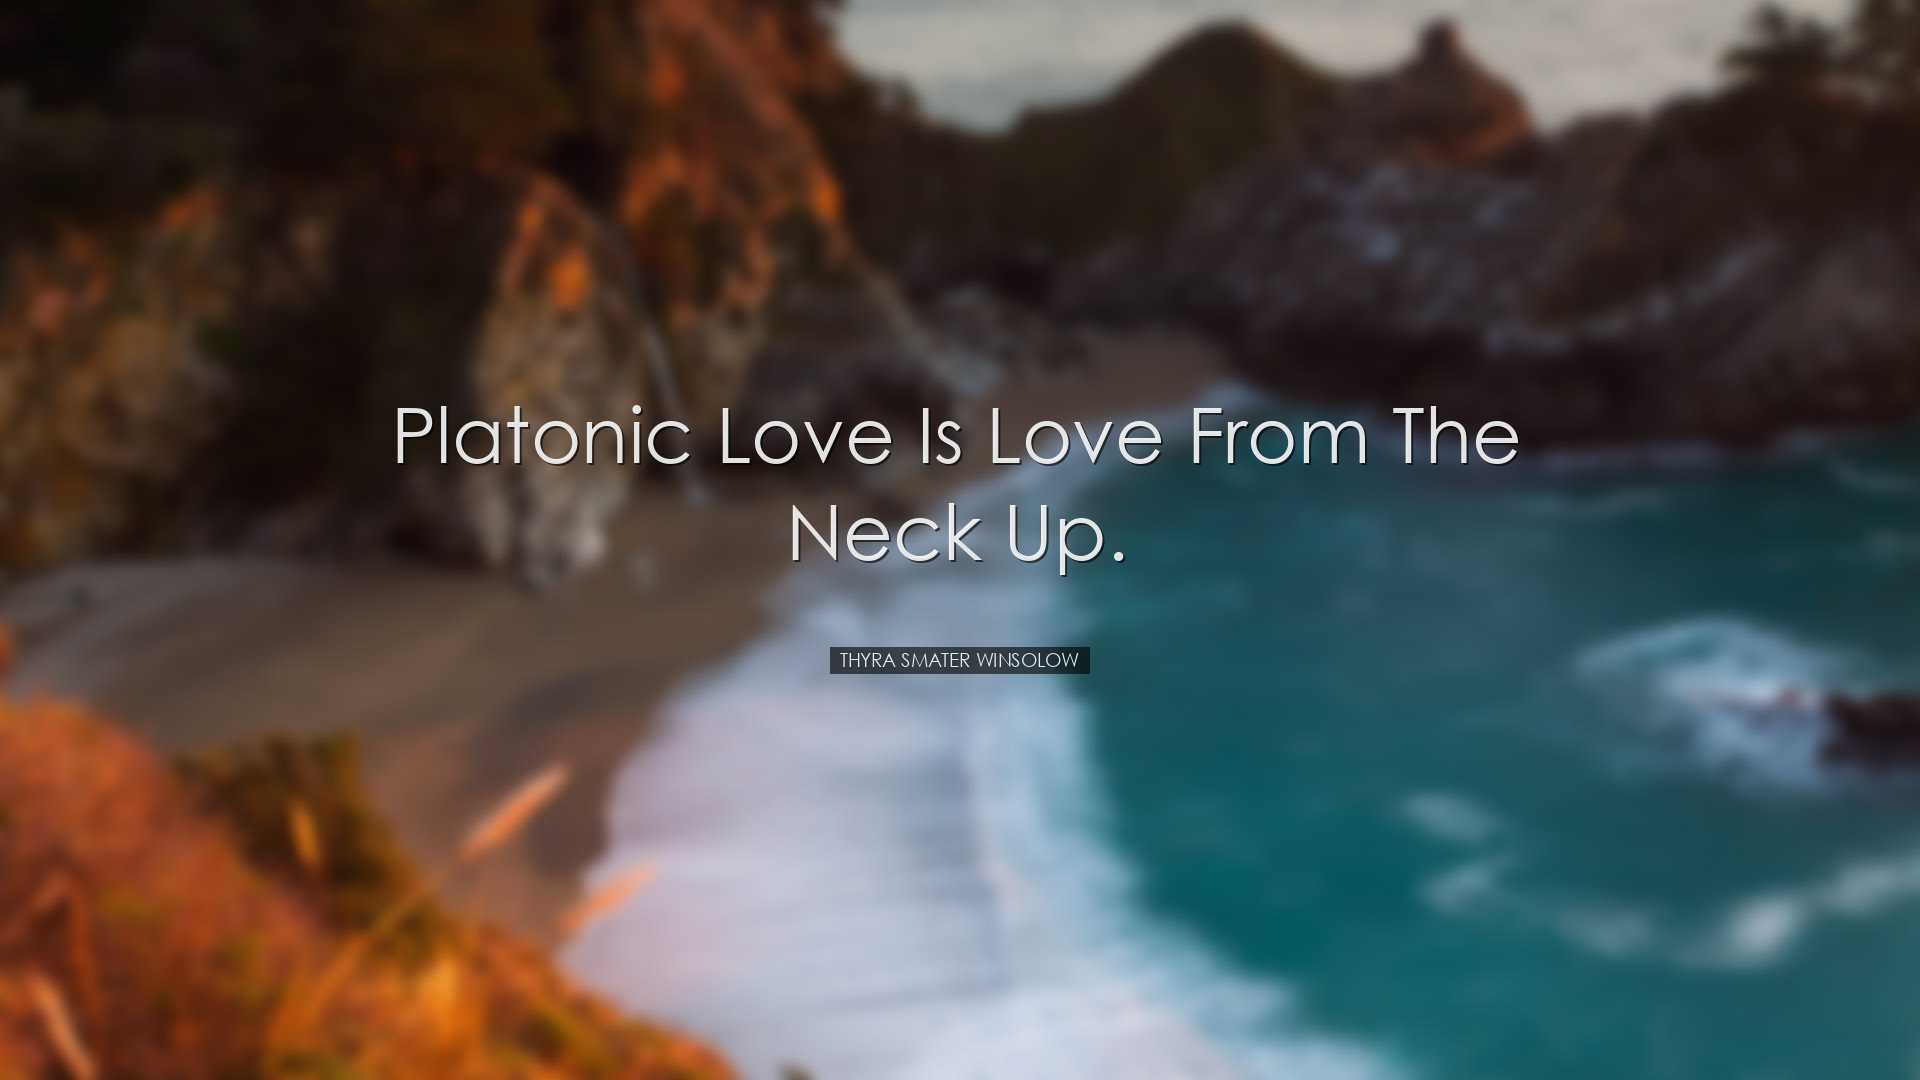 Platonic love is love from the neck up. - Thyra Smater Winsolow